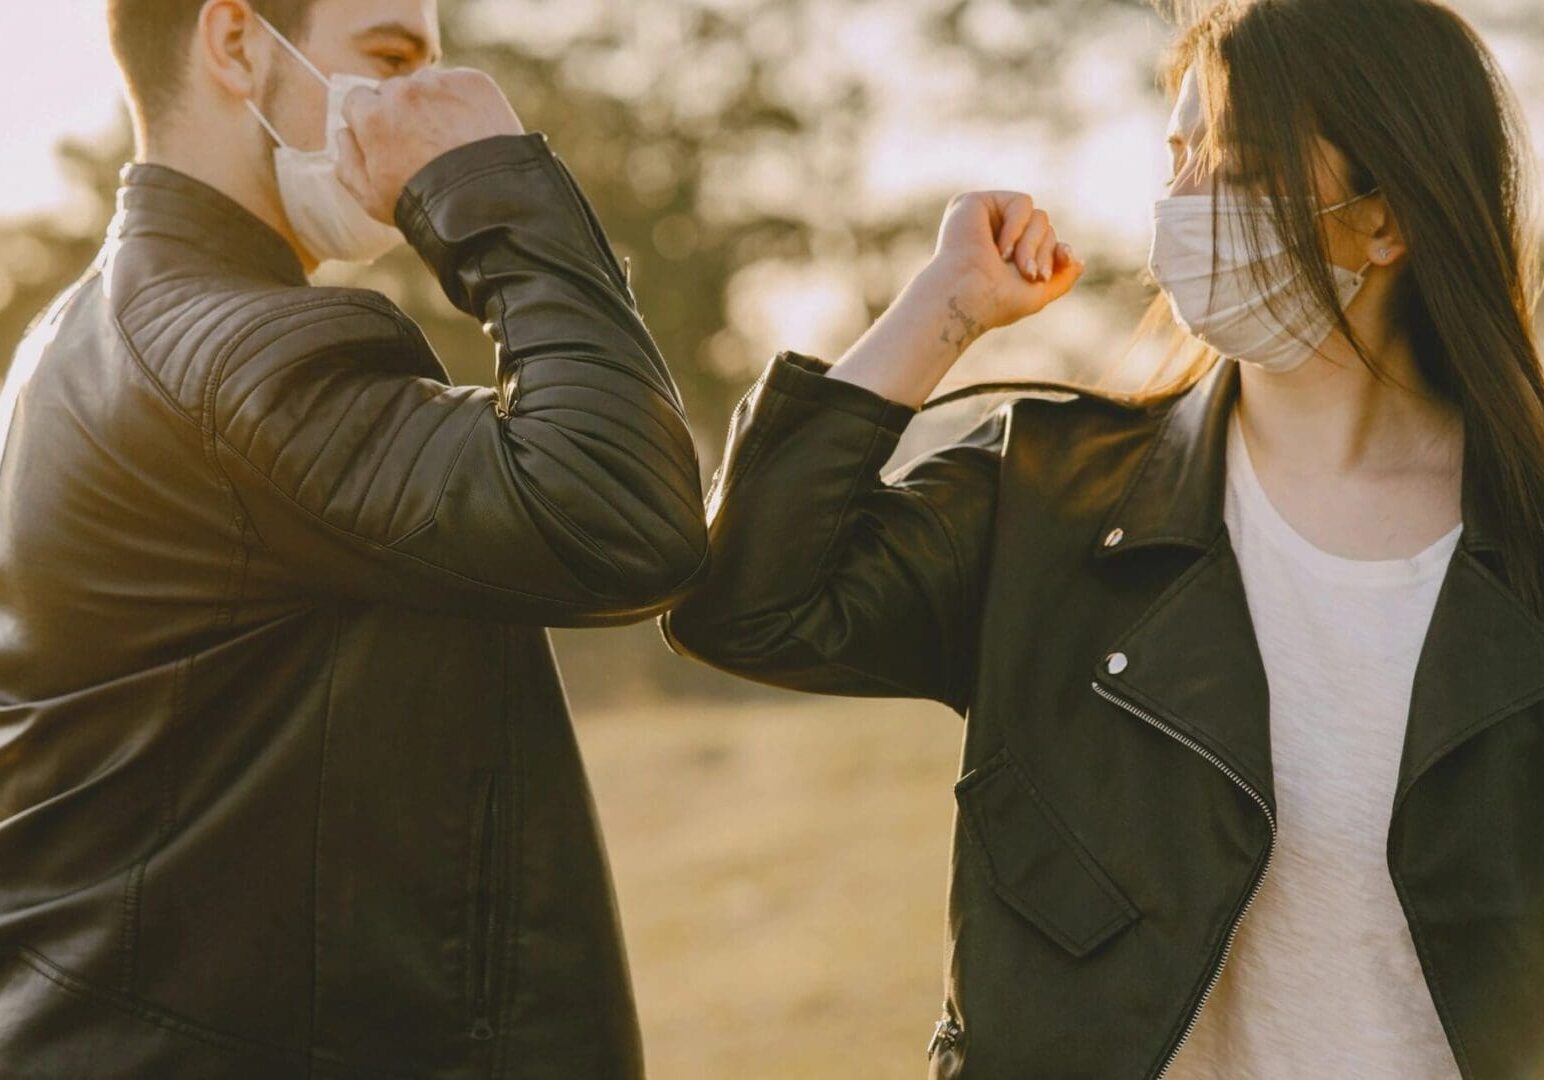 Two people in leather jackets and face masks greeting each other with an elbow bump outdoors at sunset after an online education session.